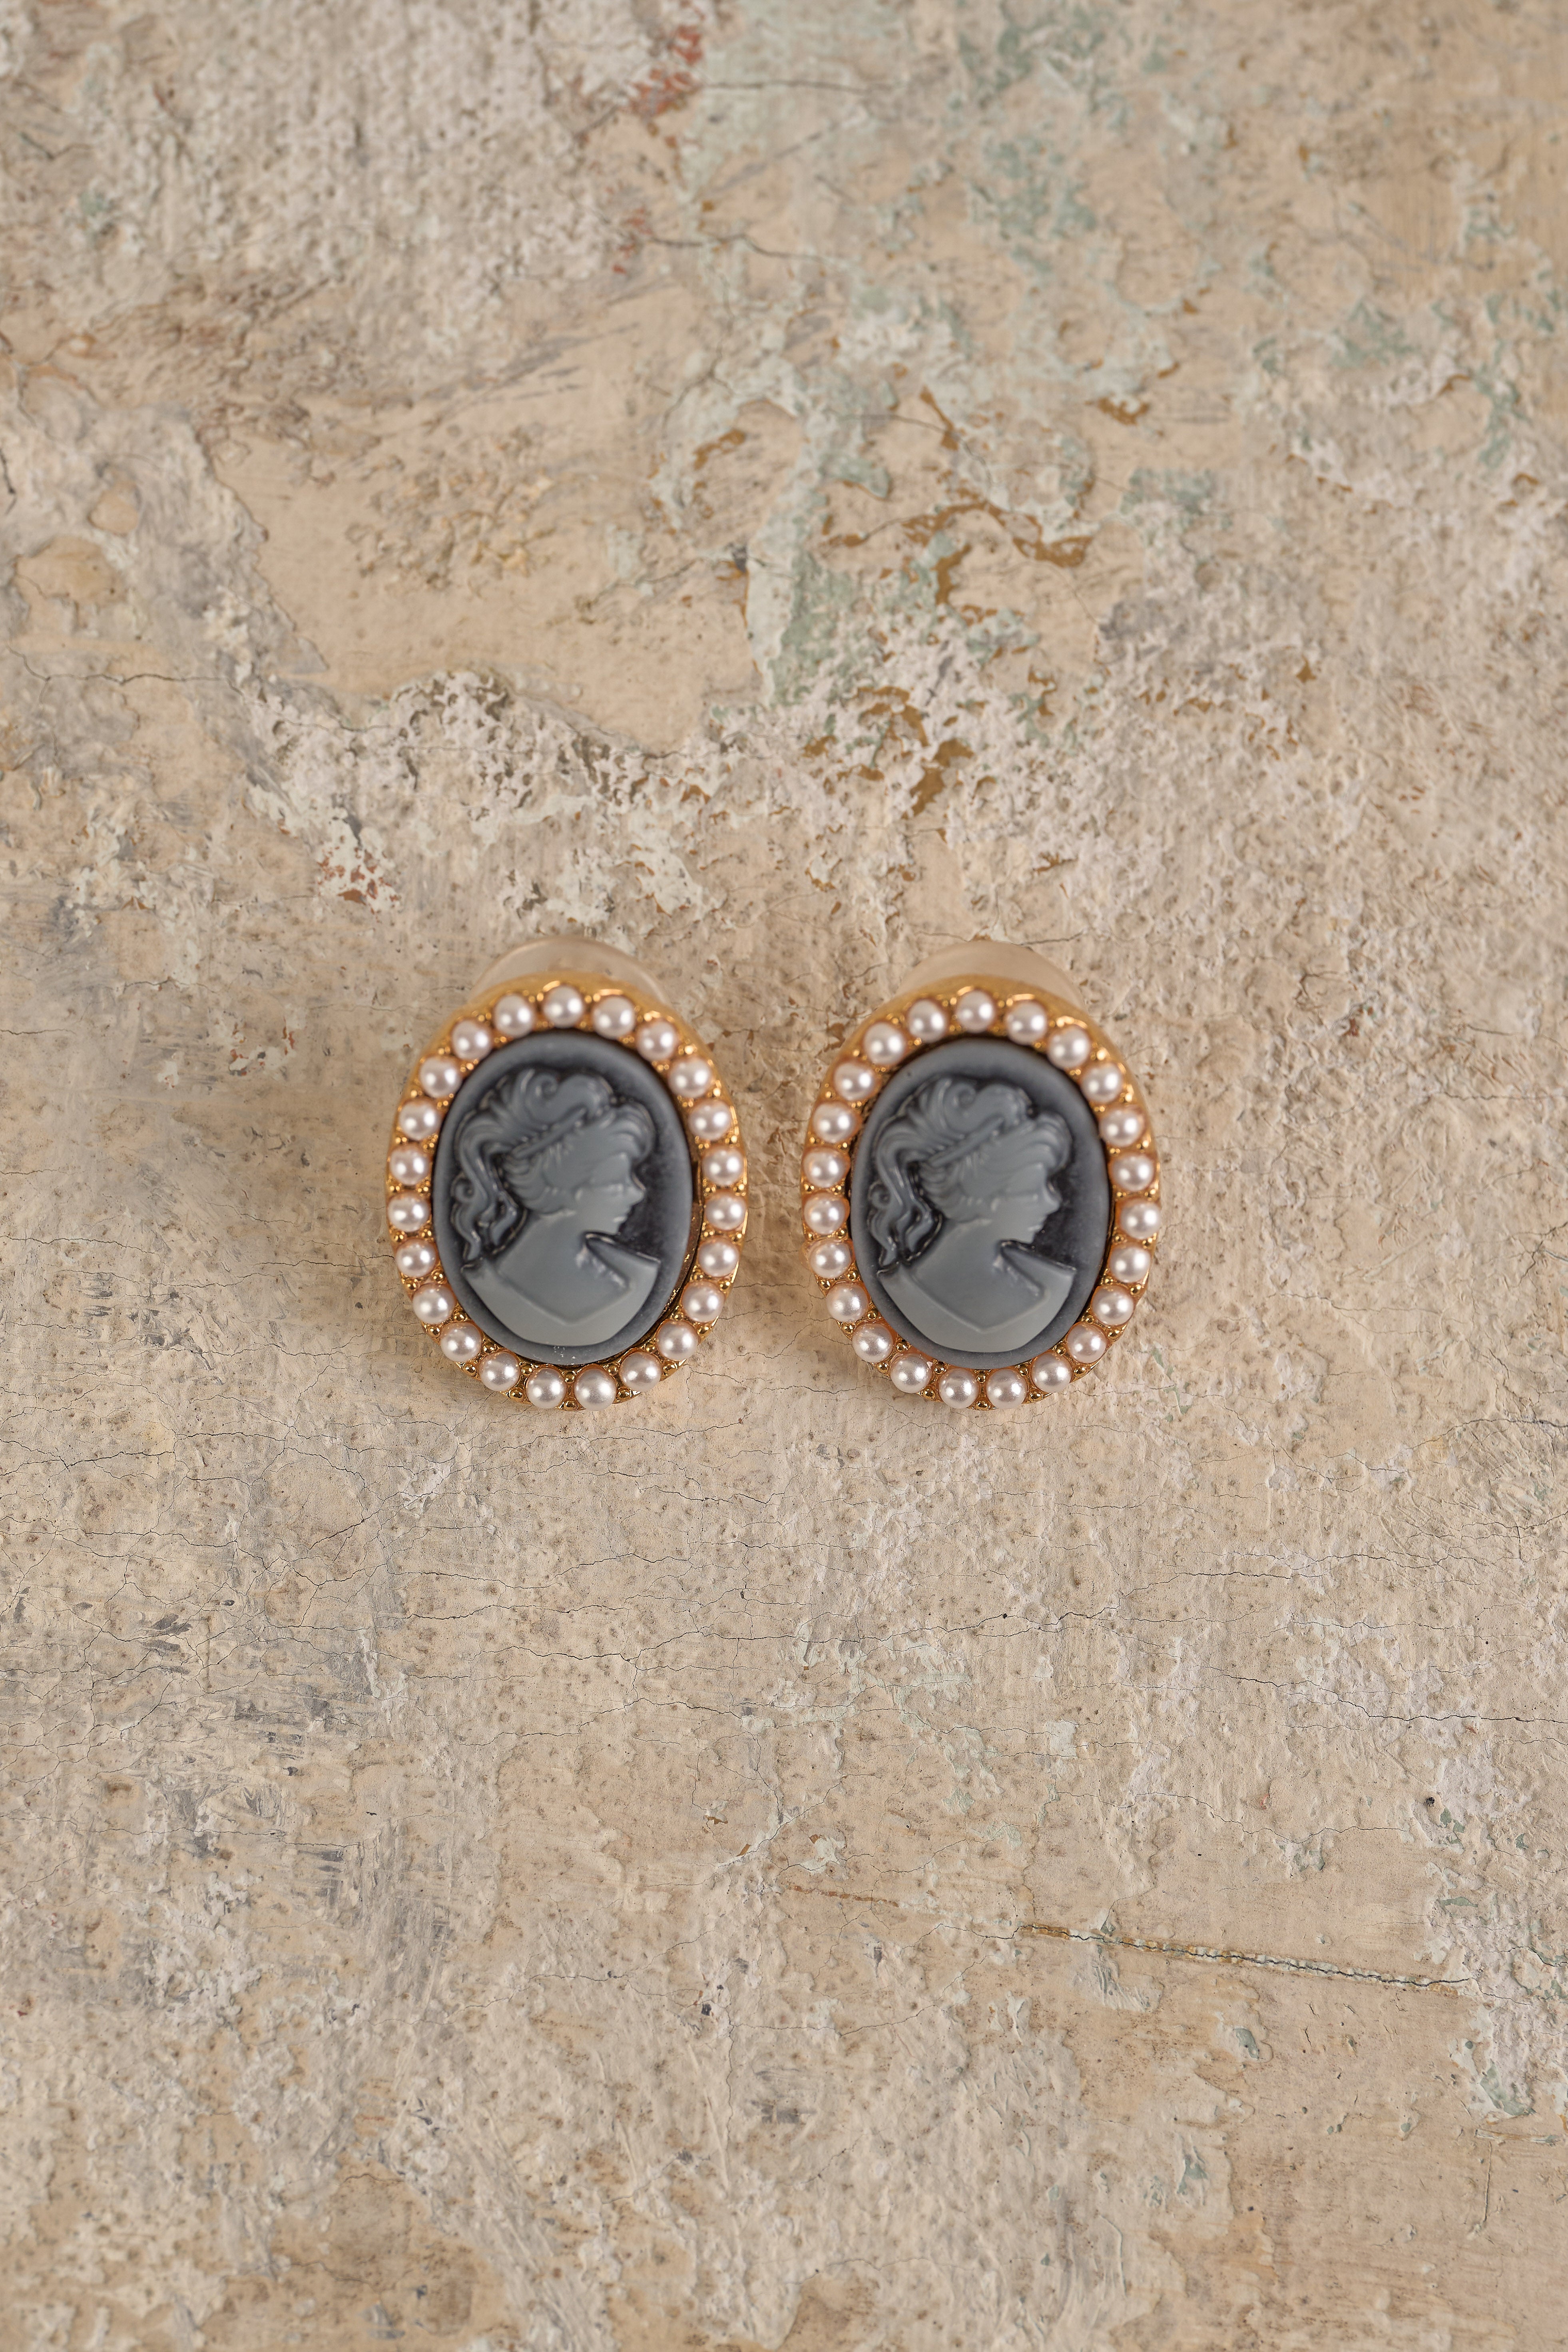 Buy Victorian Cameo Earrings, Large Cameo Earrings, Victorian Stud Earrings,  Antique Cameo Earrings, Large Cameo Studs, Victorian Studs Online in India  - Etsy